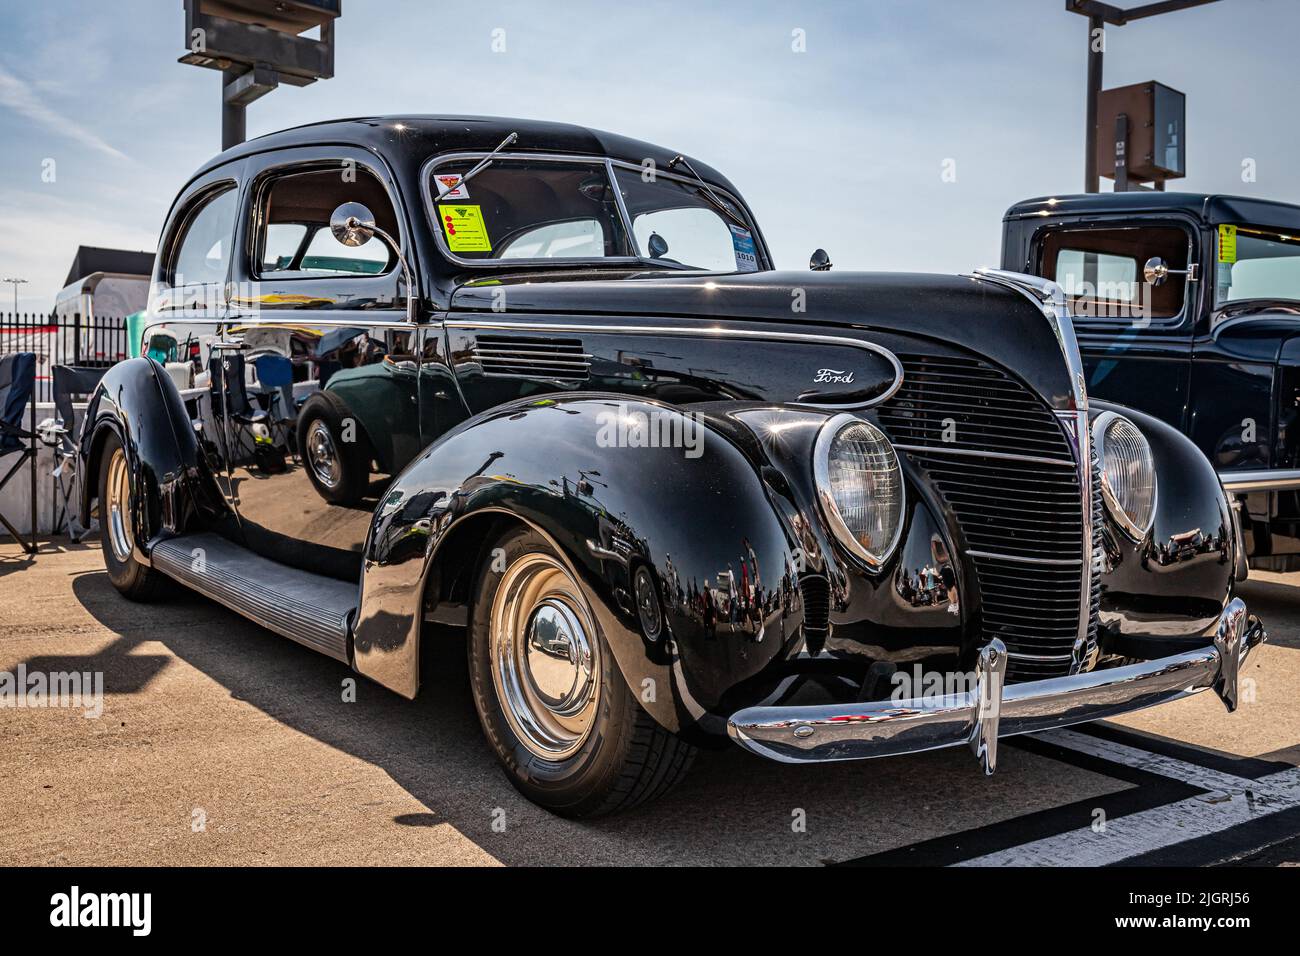 Lebanon, TN - May 14, 2022: Low perspective front corner view of a 1939 Ford Standard Tudor Sedan at a local car show. Stock Photo